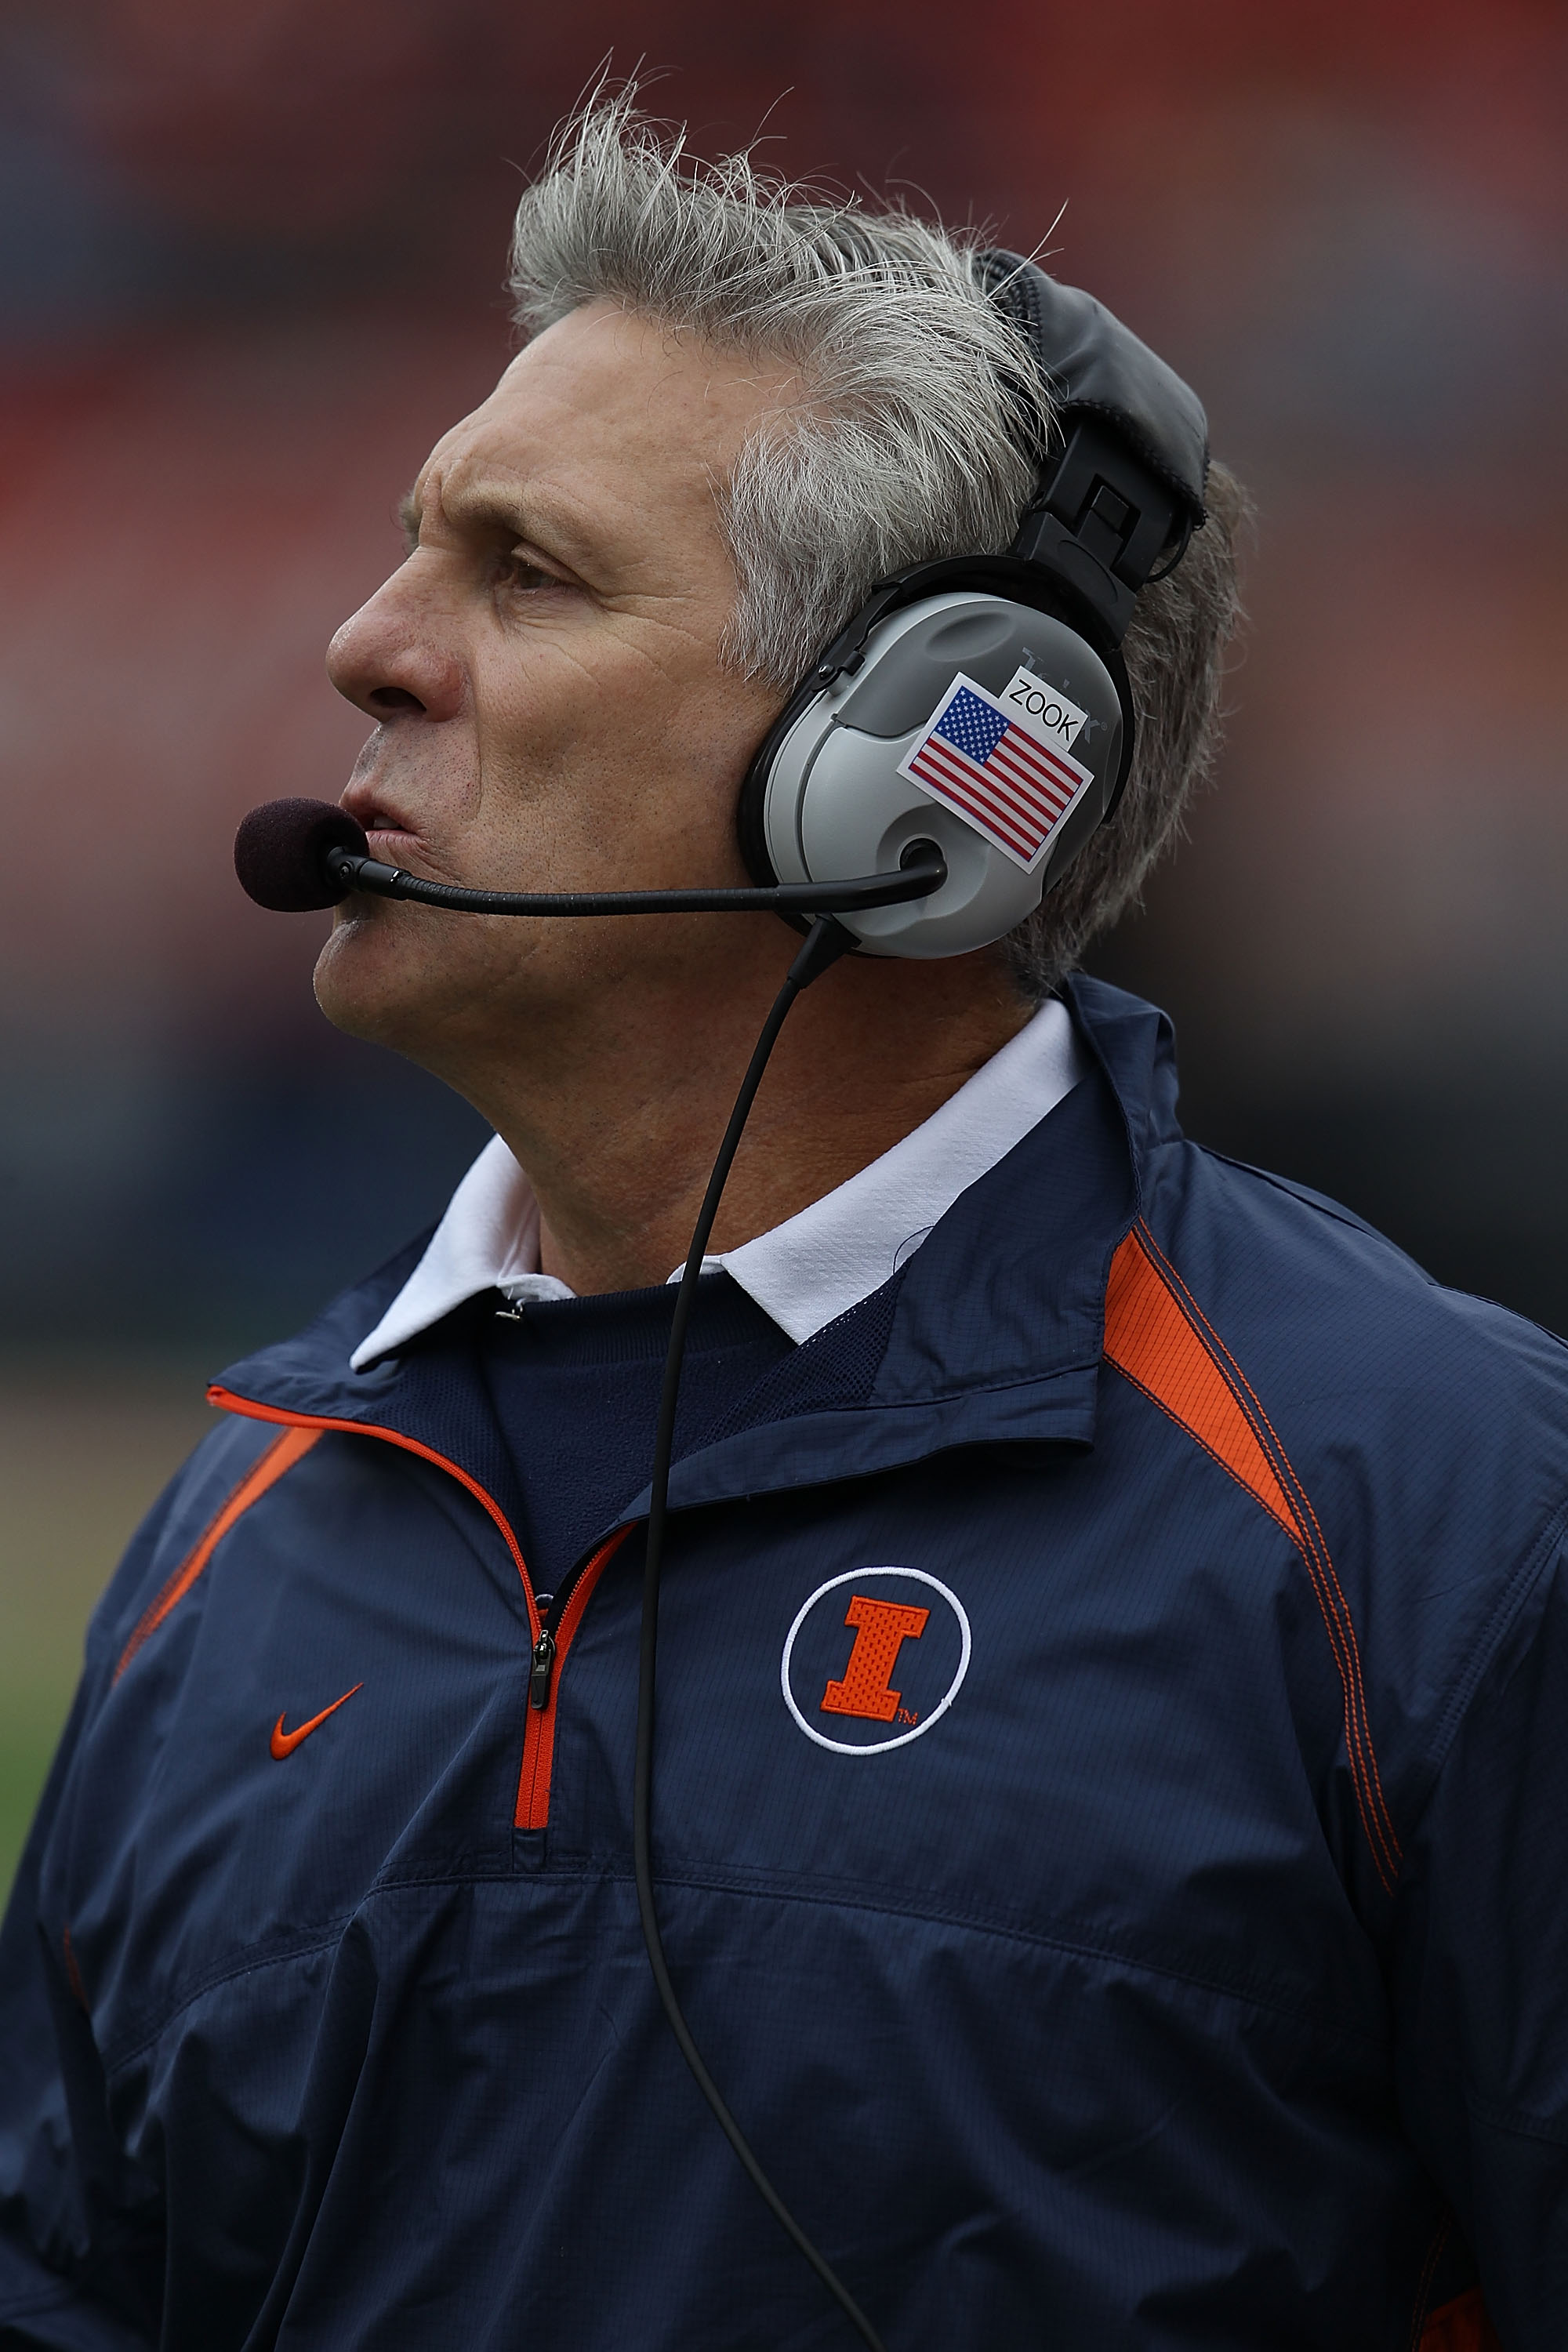 CHAMPAIGN, IL - OCTOBER 02: Head coach Ron Zook of the Illinois Fighting Illini watches as his team takes on the Ohio State Buckeyes at Memorial Stadium on October 2, 2010 in Champaign, Illinois. Ohio State defeated Illinois 24-13. (Photo by Jonathan Dani